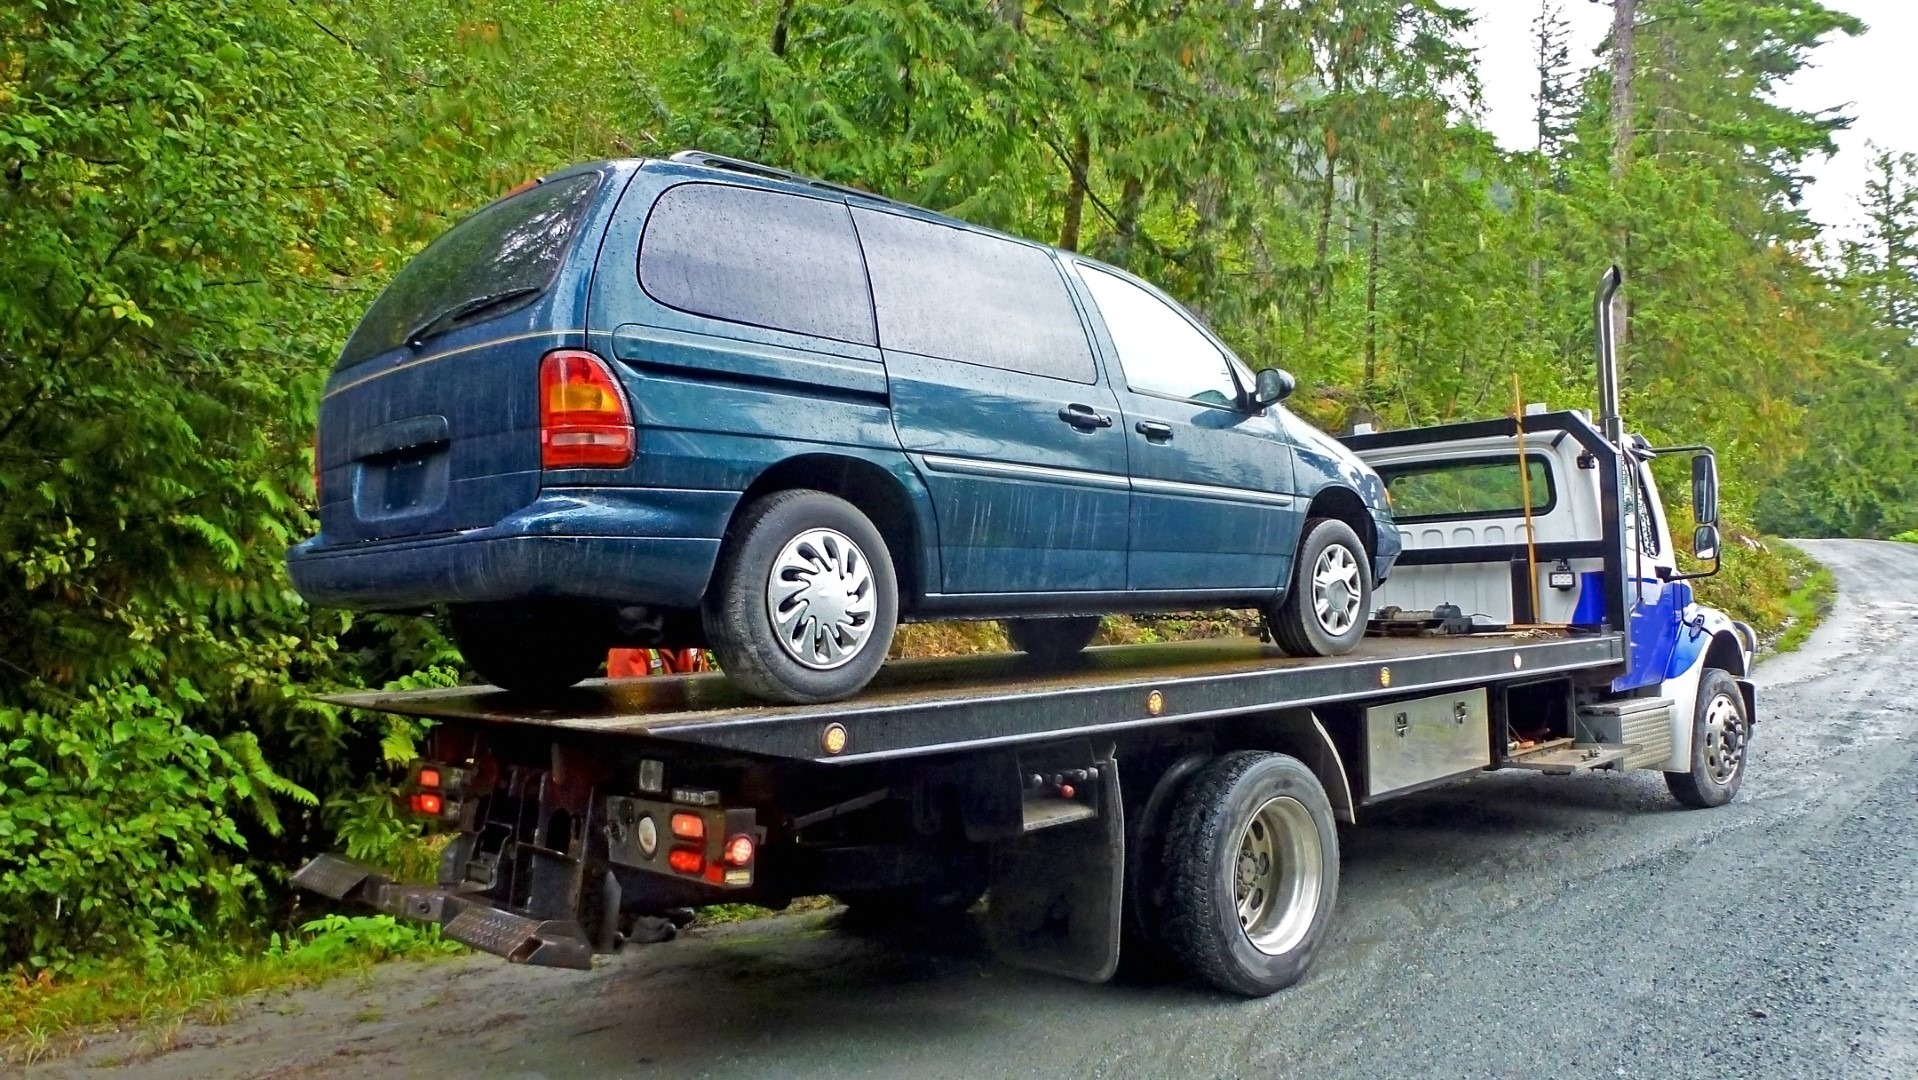 Towing service - the blue tow truck with the loaded old damaged